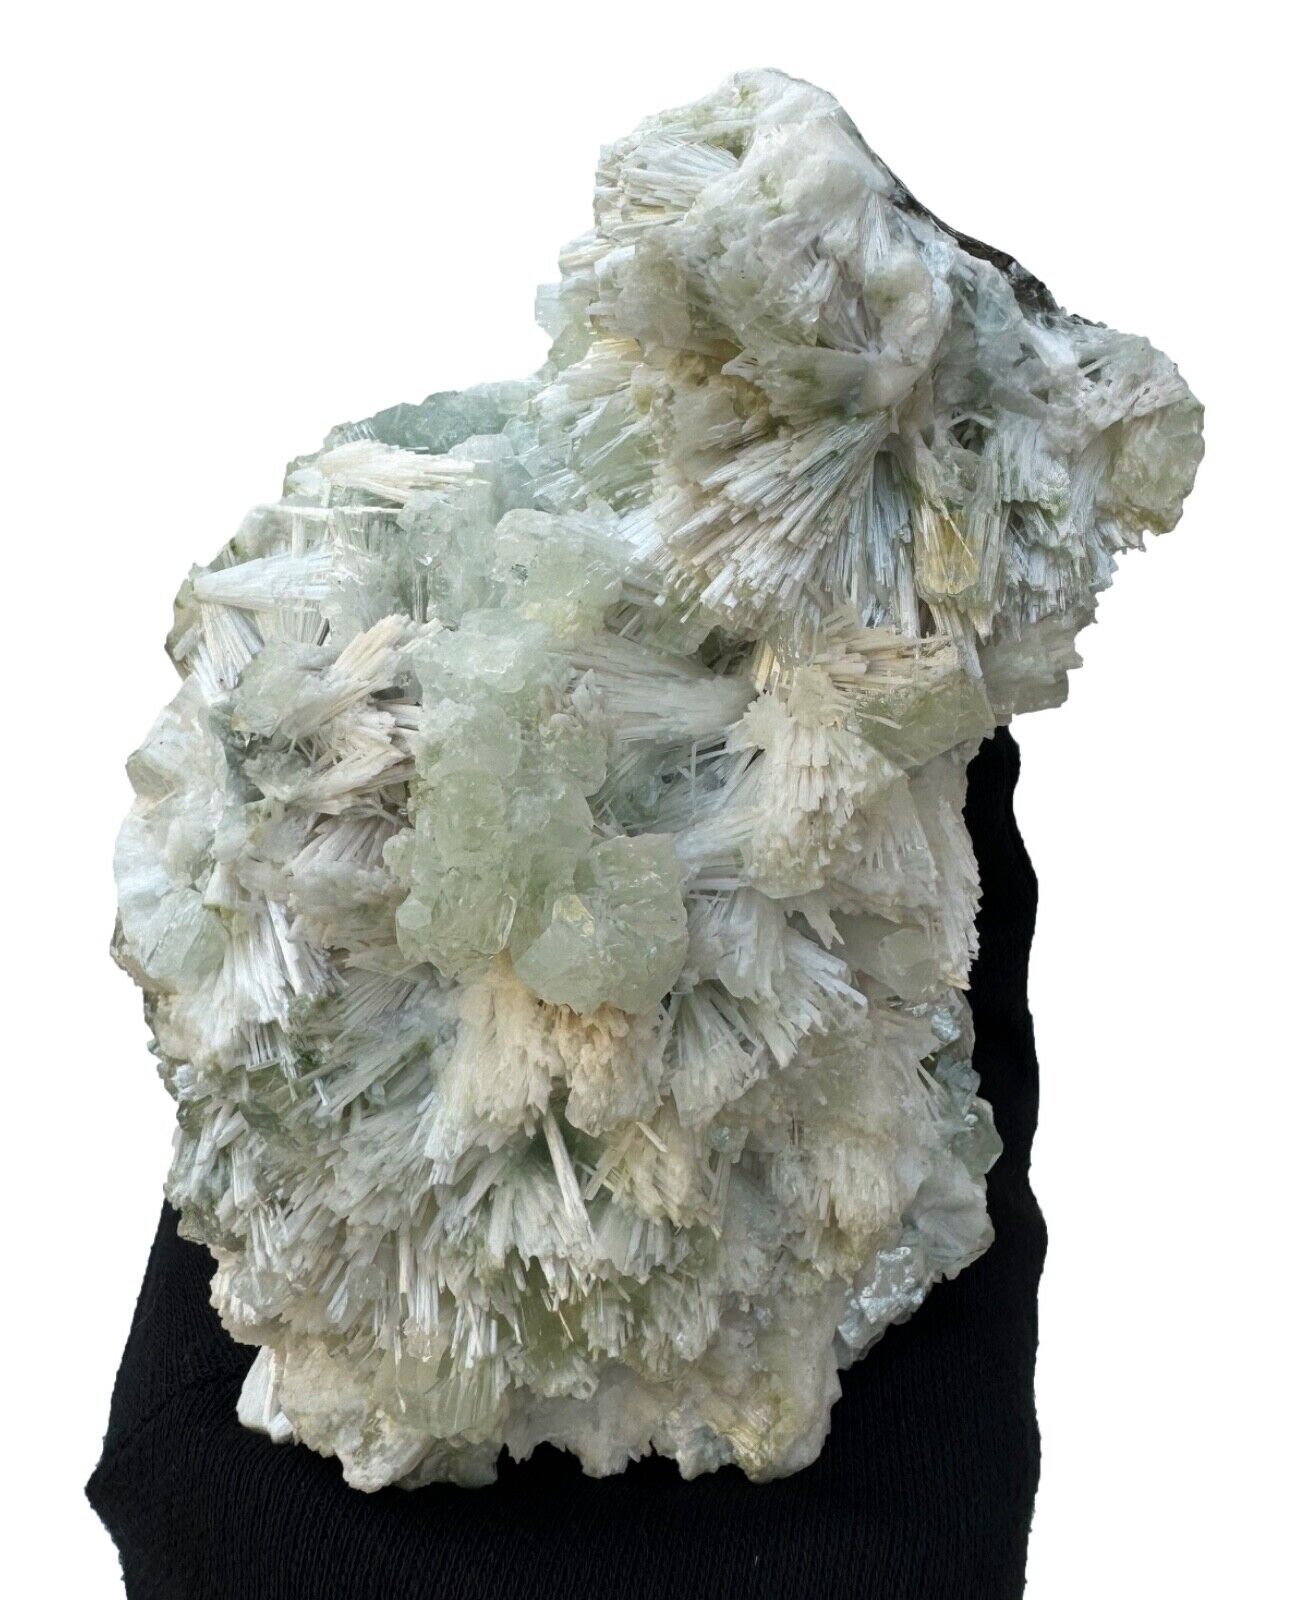 Self Standing Apophyllite On Scolecite Crystals And Mineral Specimens